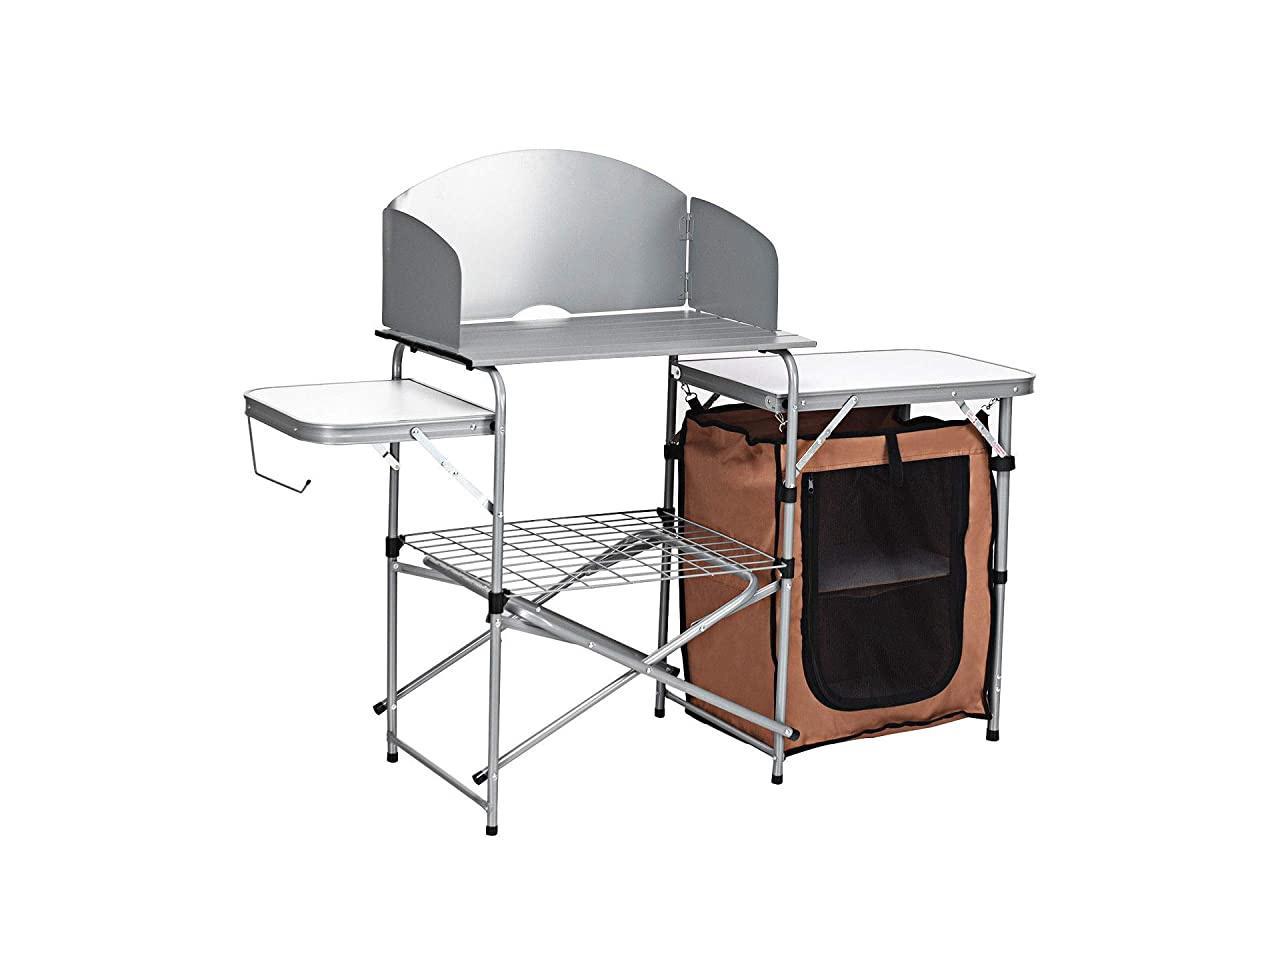 Camp Field Folding Grill Table with 26'' Tabletop and Detachable Windscreen Aluminum Portable Camp Cook Station with Carry Bag Quick Set-up for BBQ Camping Picnic Backyard Outdoor Camping Kitchen Table